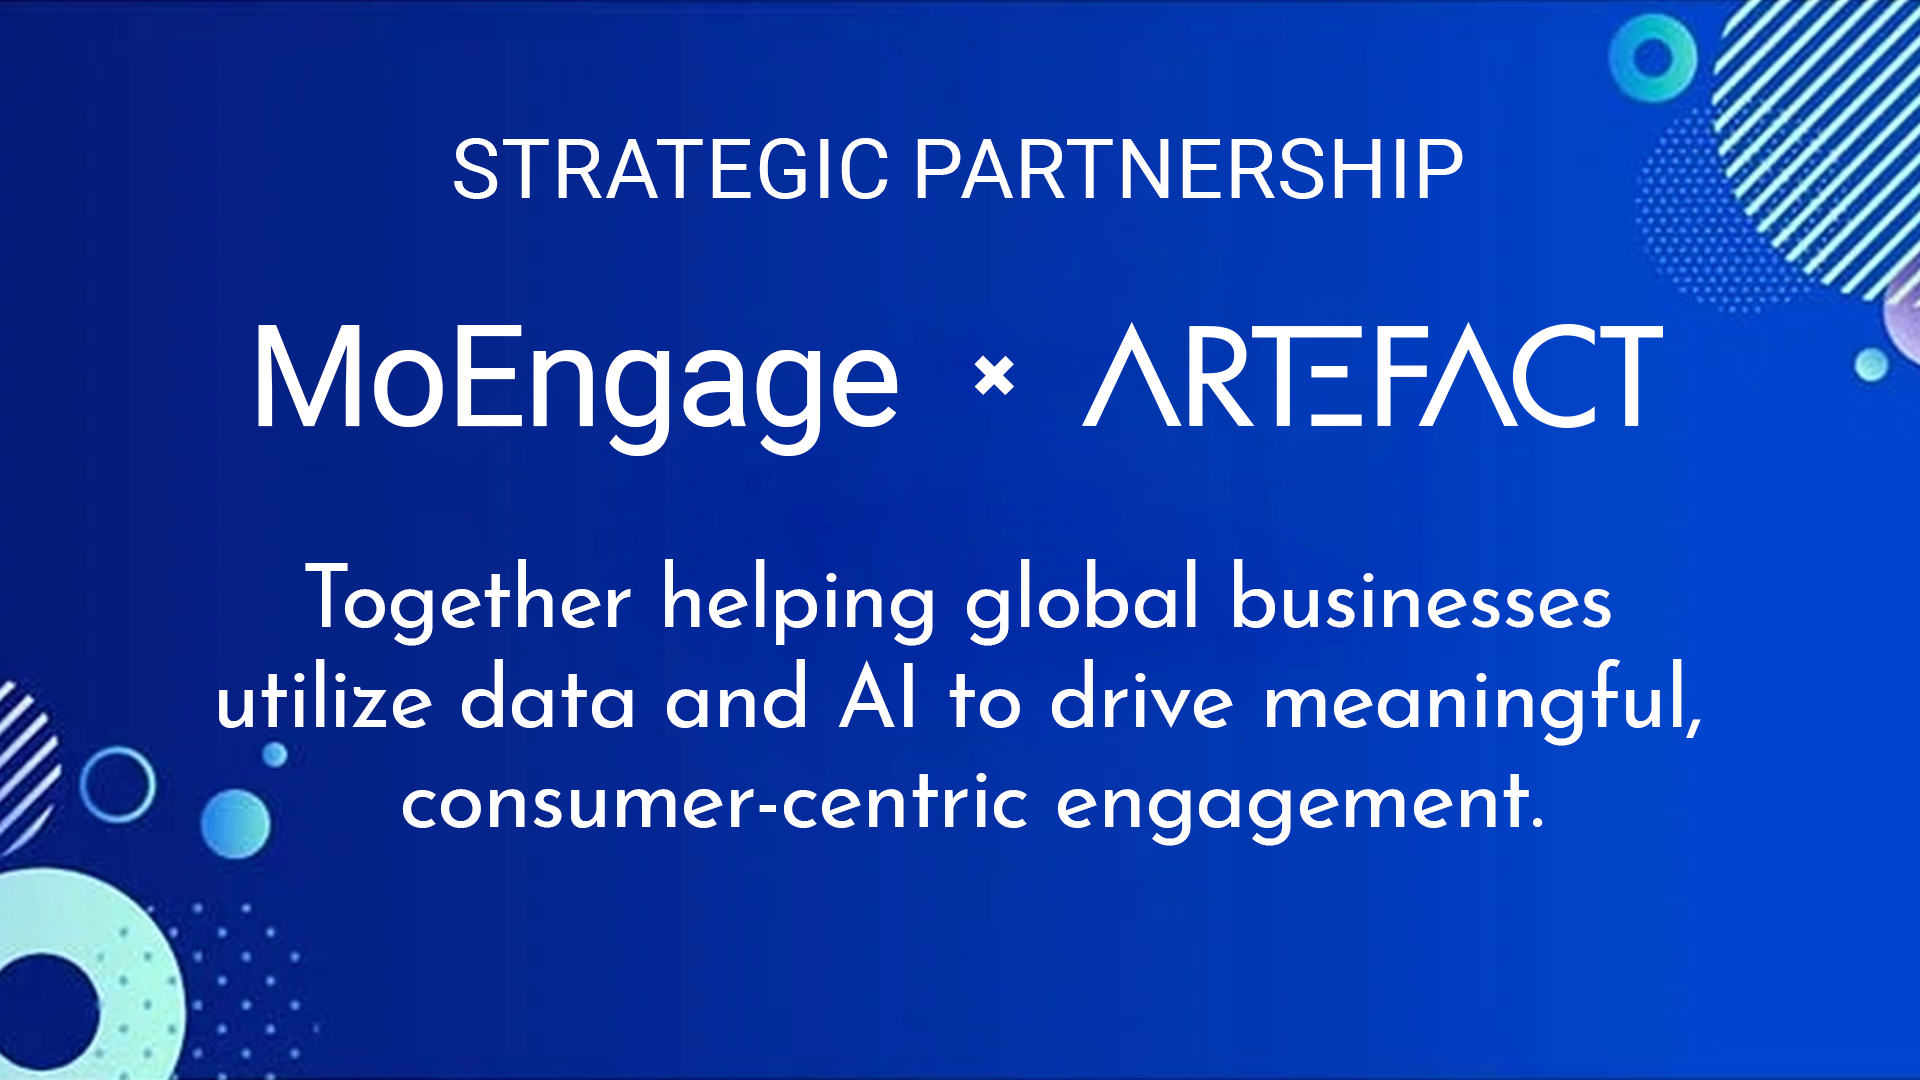 Artefact and MoEngage join efforts to help global businesses utilize data and AI to drive meaningful, consumer-centric engagement